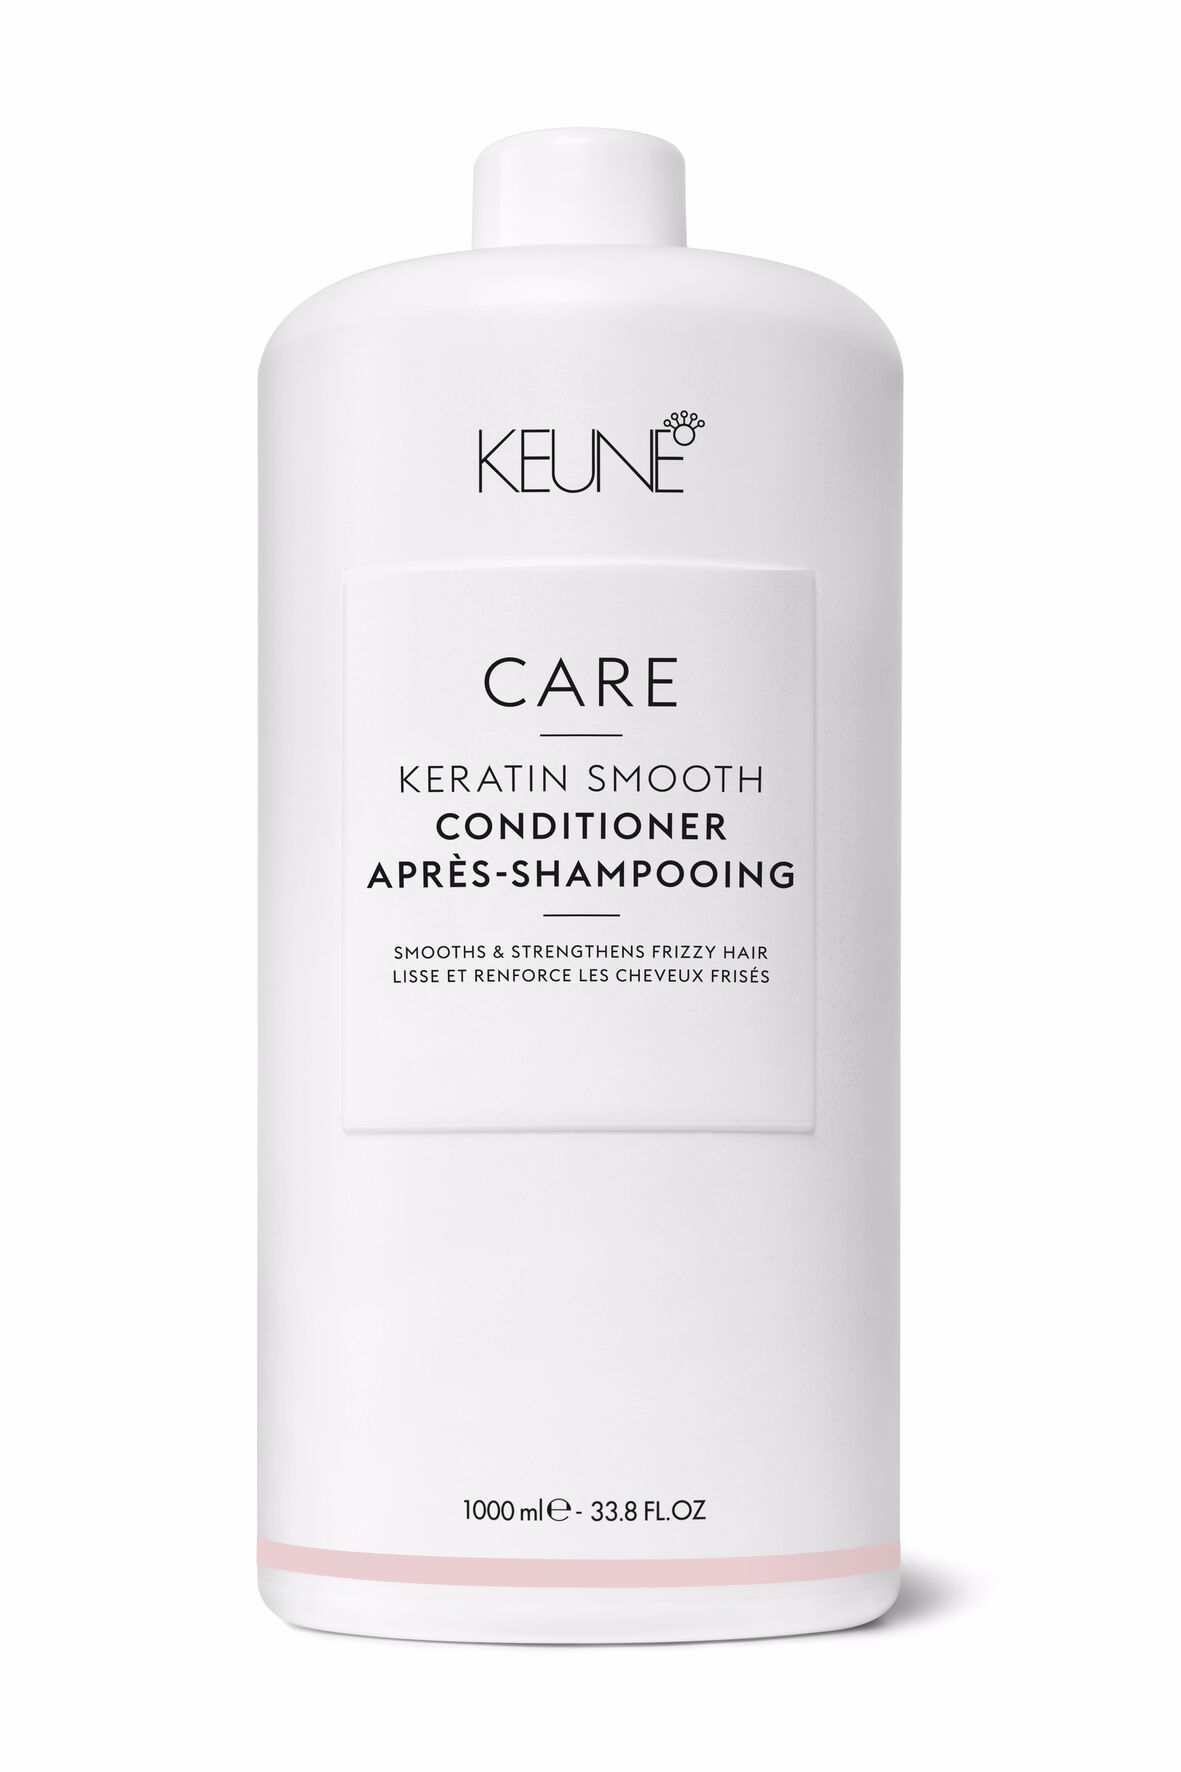 Discover CARE KERATIN SMOOTH CONDITIONER on keune.ch: Hair care with keratin, provitamin B5, and shea butter for shiny, easily manageable hair. Protection against frizz and hair breakage. Keune.ch.